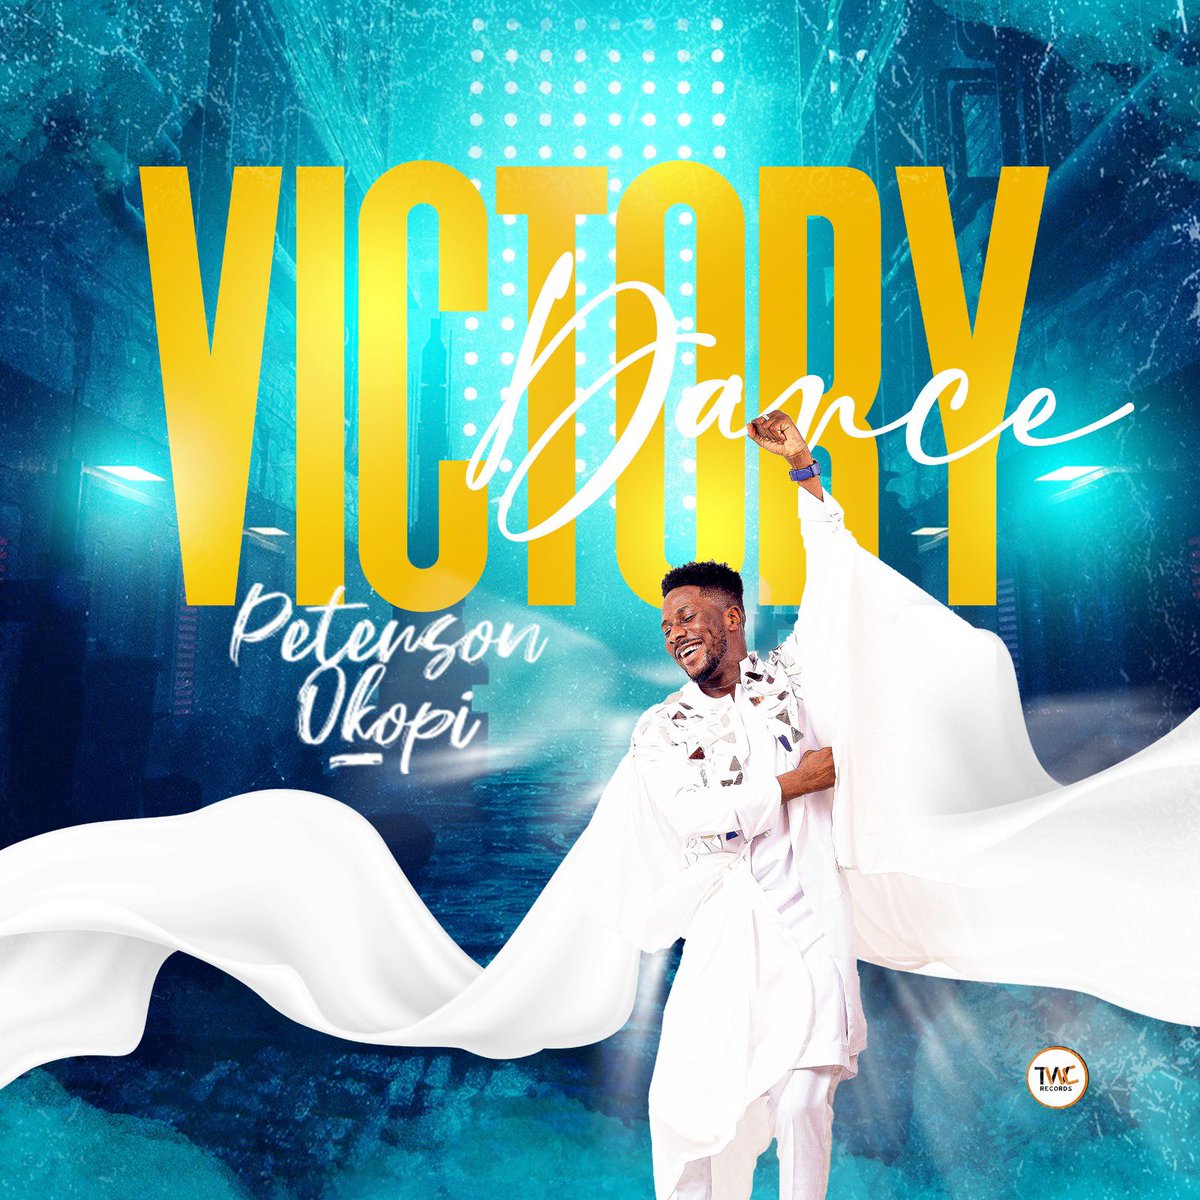 VICTORY DANCE by @Okopi_Peterson is one of the best gospel songs I've heard in a very long while #PetersonVictoryDance